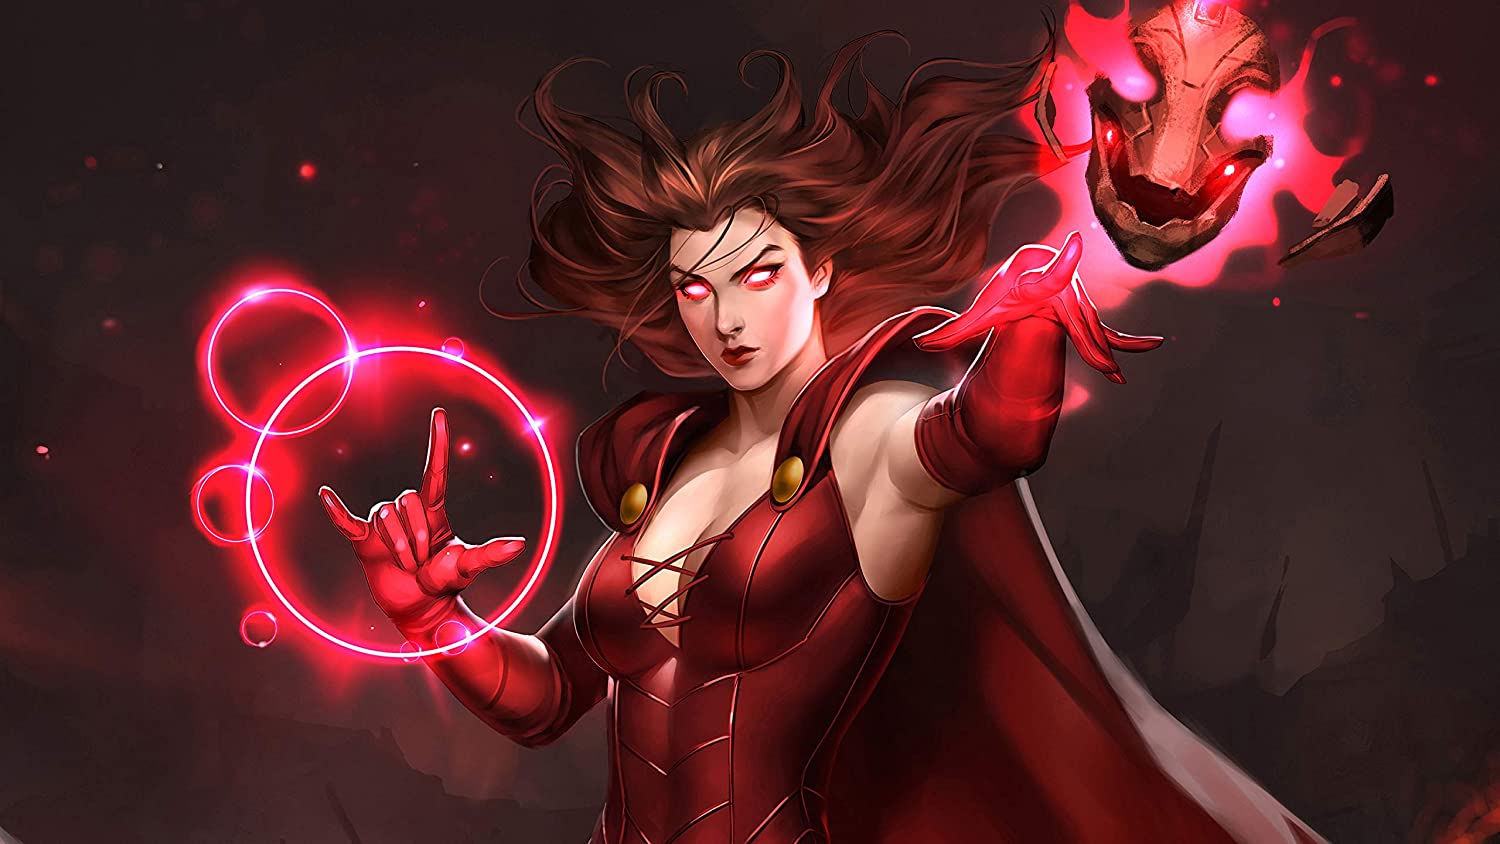 Marvel Universe Caracter Wallpaper, Scarlet Witch Wall Decoration, Comics Artwork, Handmade Products